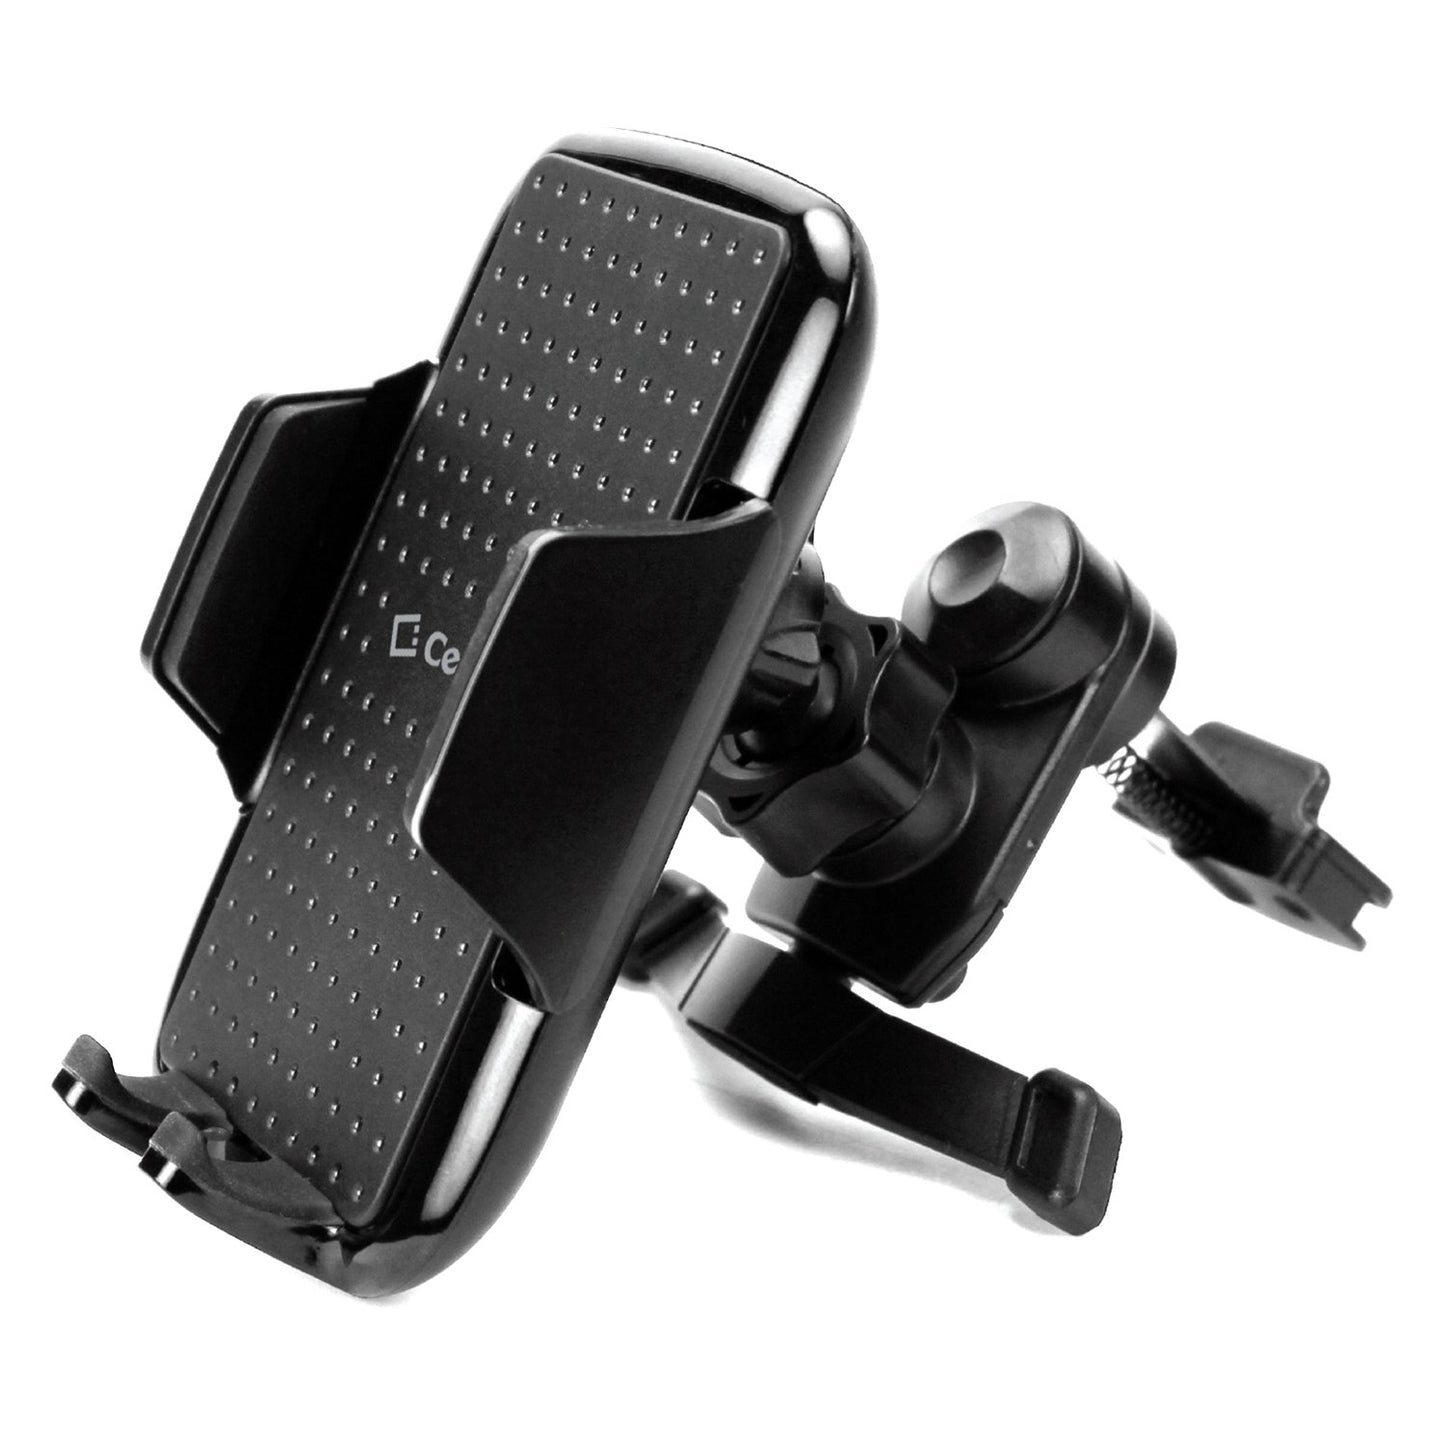 PHVENTCN - Air Vent Phone Holder, Smartphone Air Vent Mount Holder Compatible to 3.5 in. Devices